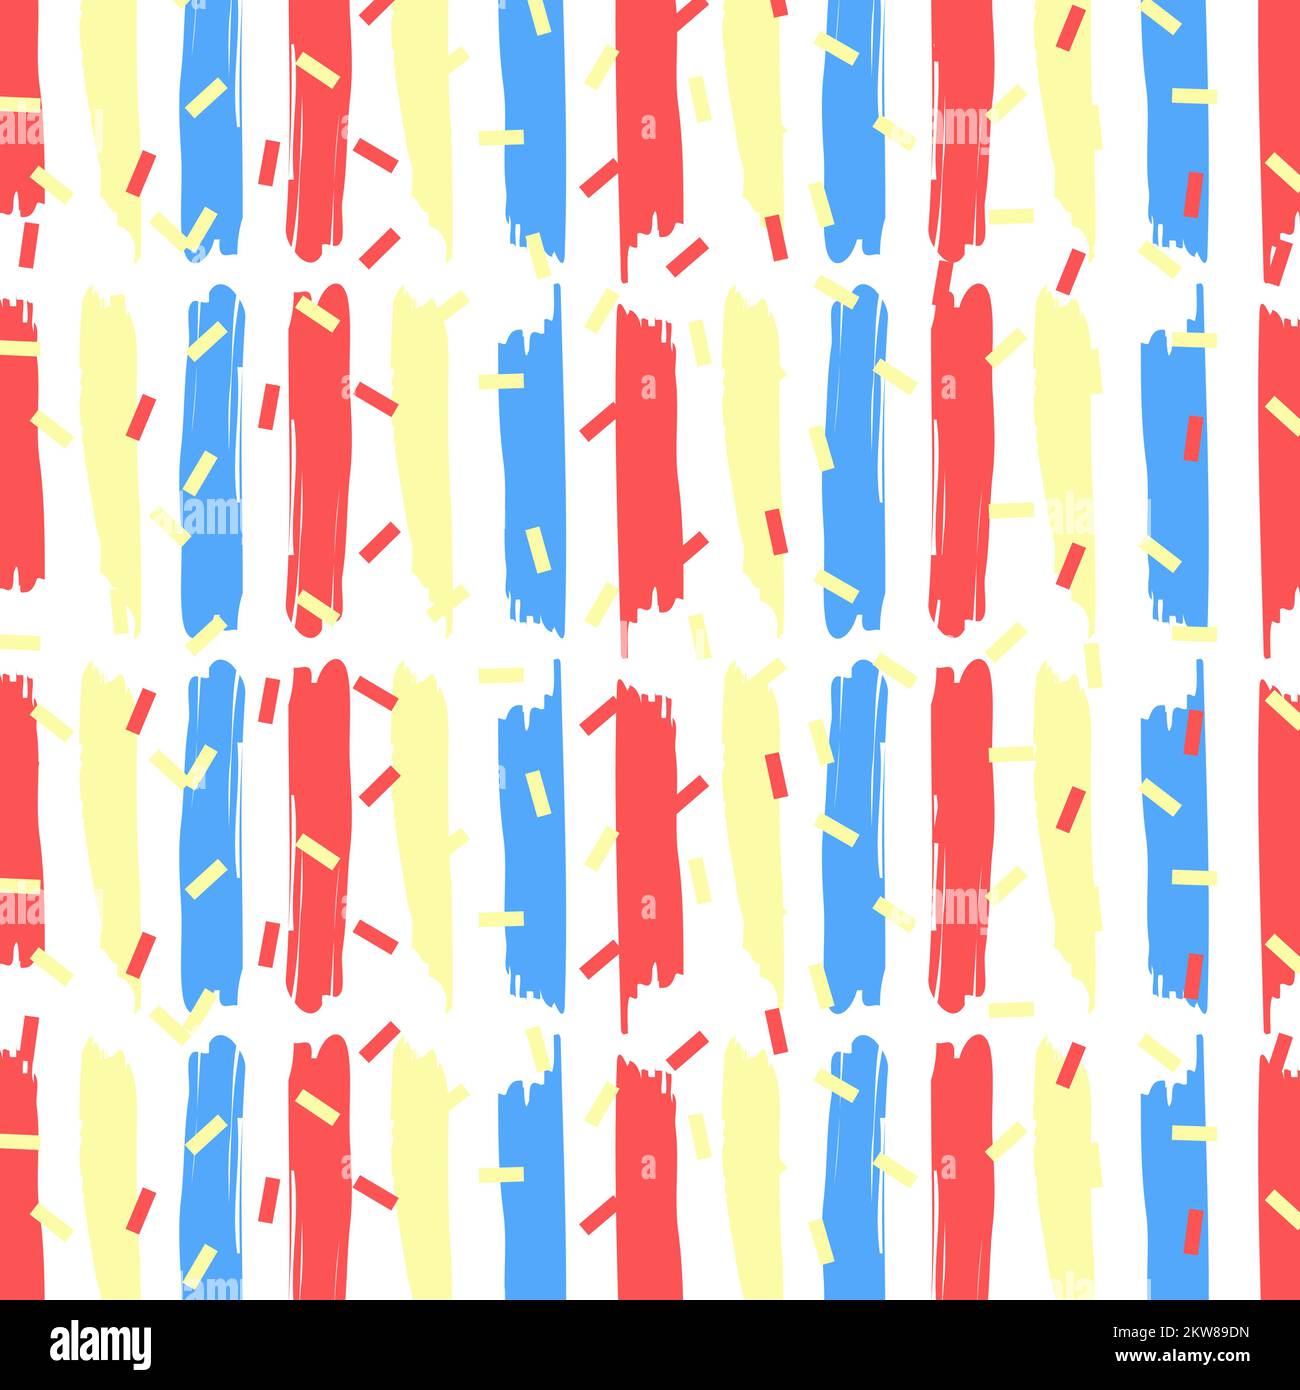 Red Yellow Blue Vertical Brush Stroke Pattern Stock Vector